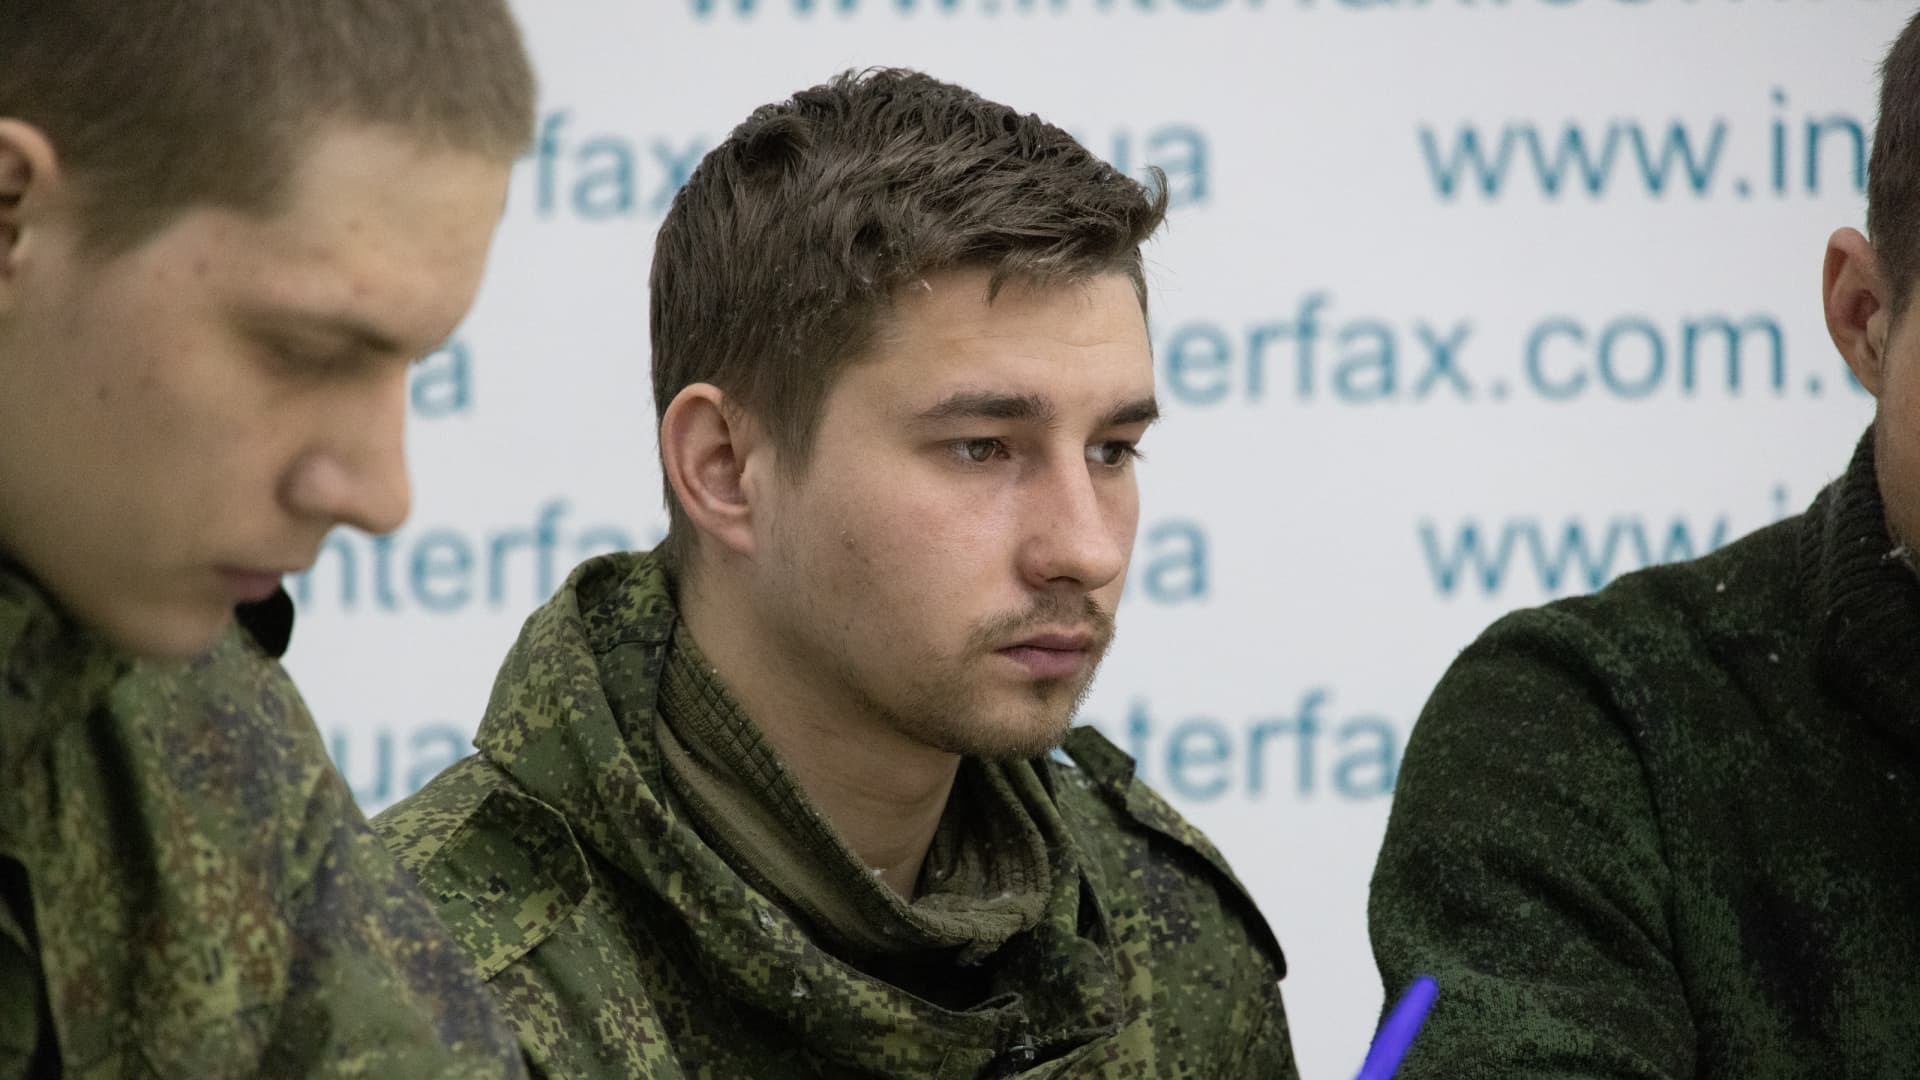 Eleven Russian soldiers captured by Ukrainian forces make a press statement on March 5, 2022 in Kyiv, Ukraine.